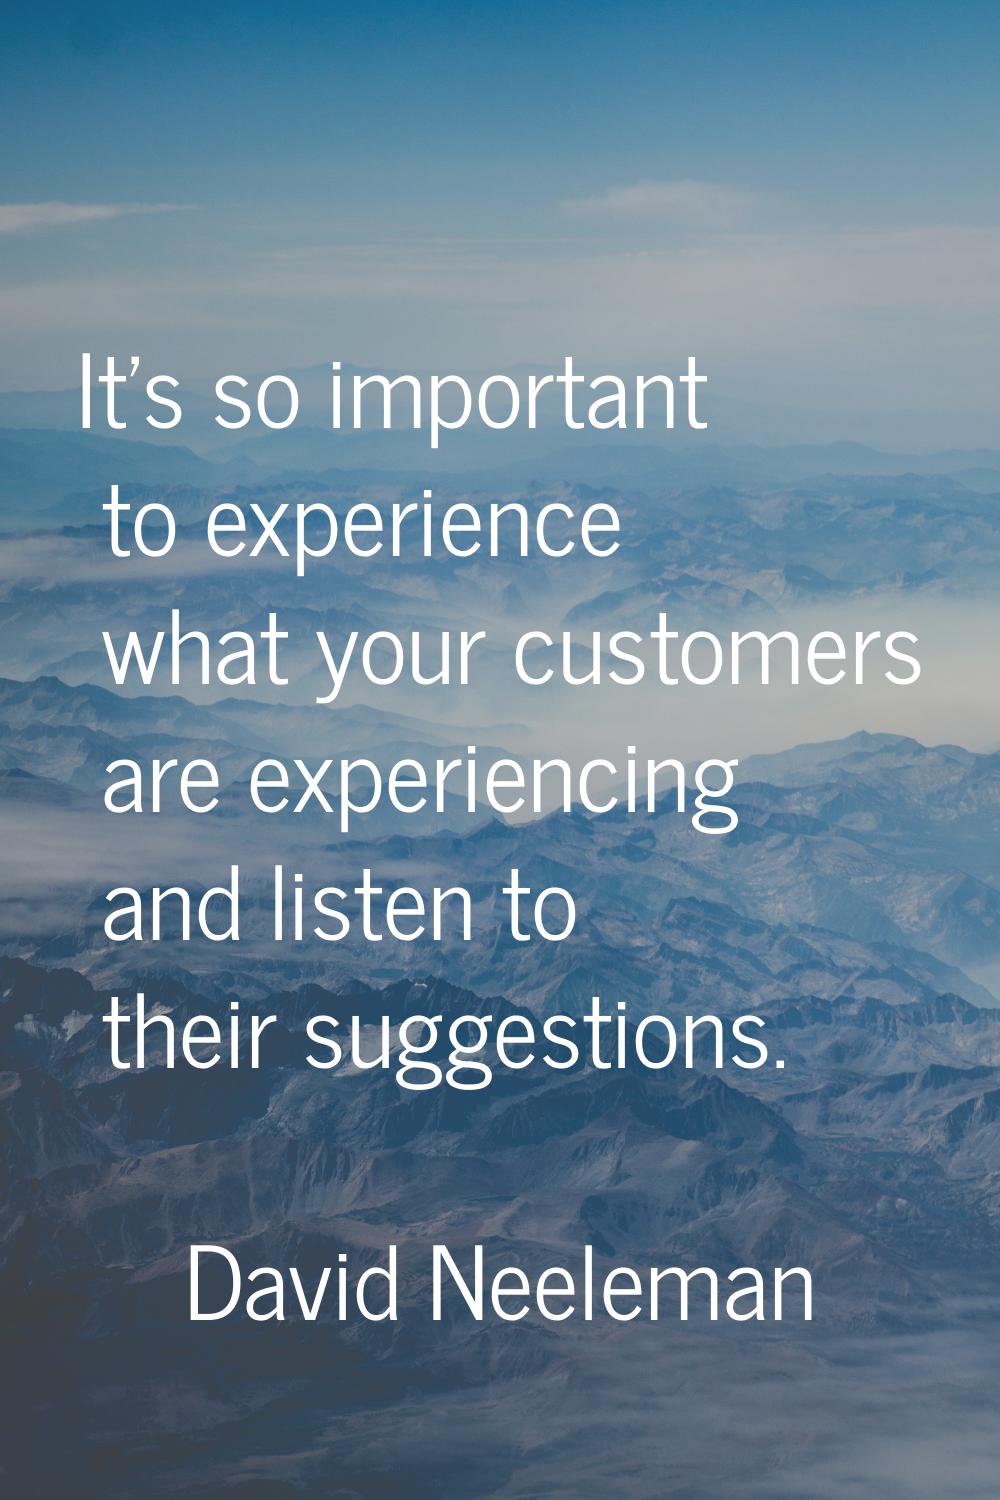 It's so important to experience what your customers are experiencing and listen to their suggestion